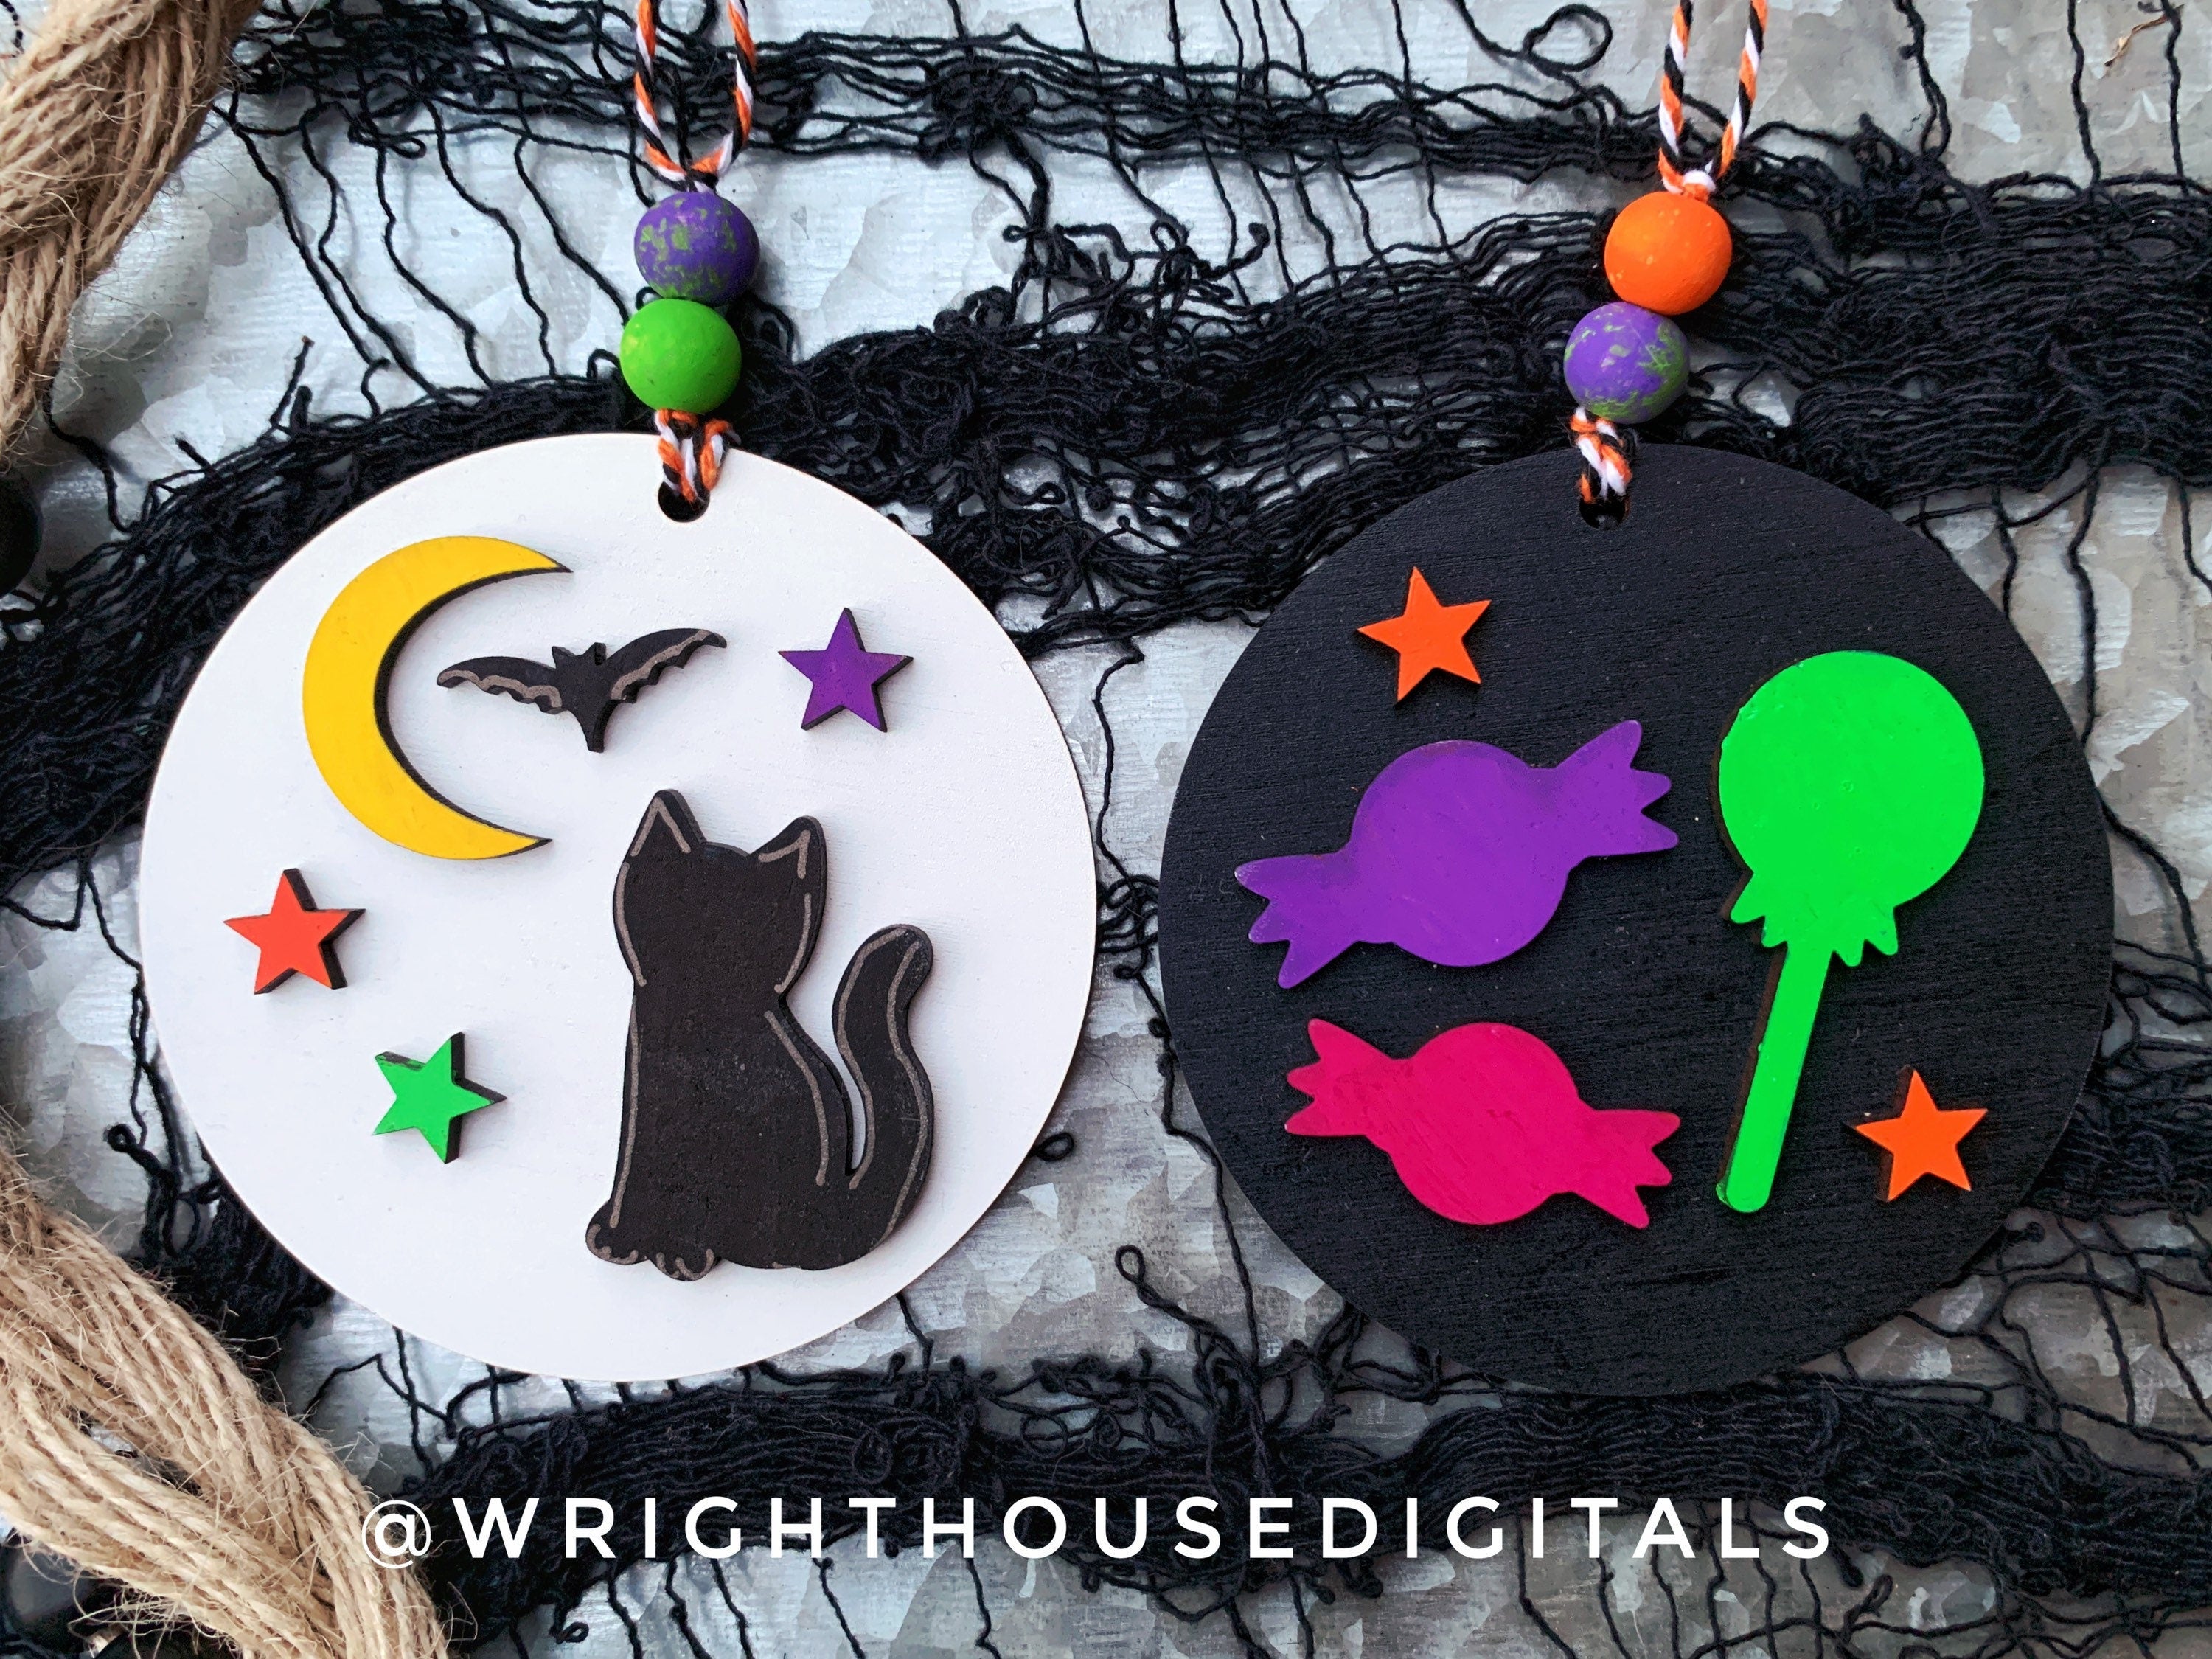 DIGITAL FILE - Halloween Icons - Black Cat and Candy - Shiplap Style Doodle Ornaments - SVG Cut File For Glowforge - Cut Files For Lasers